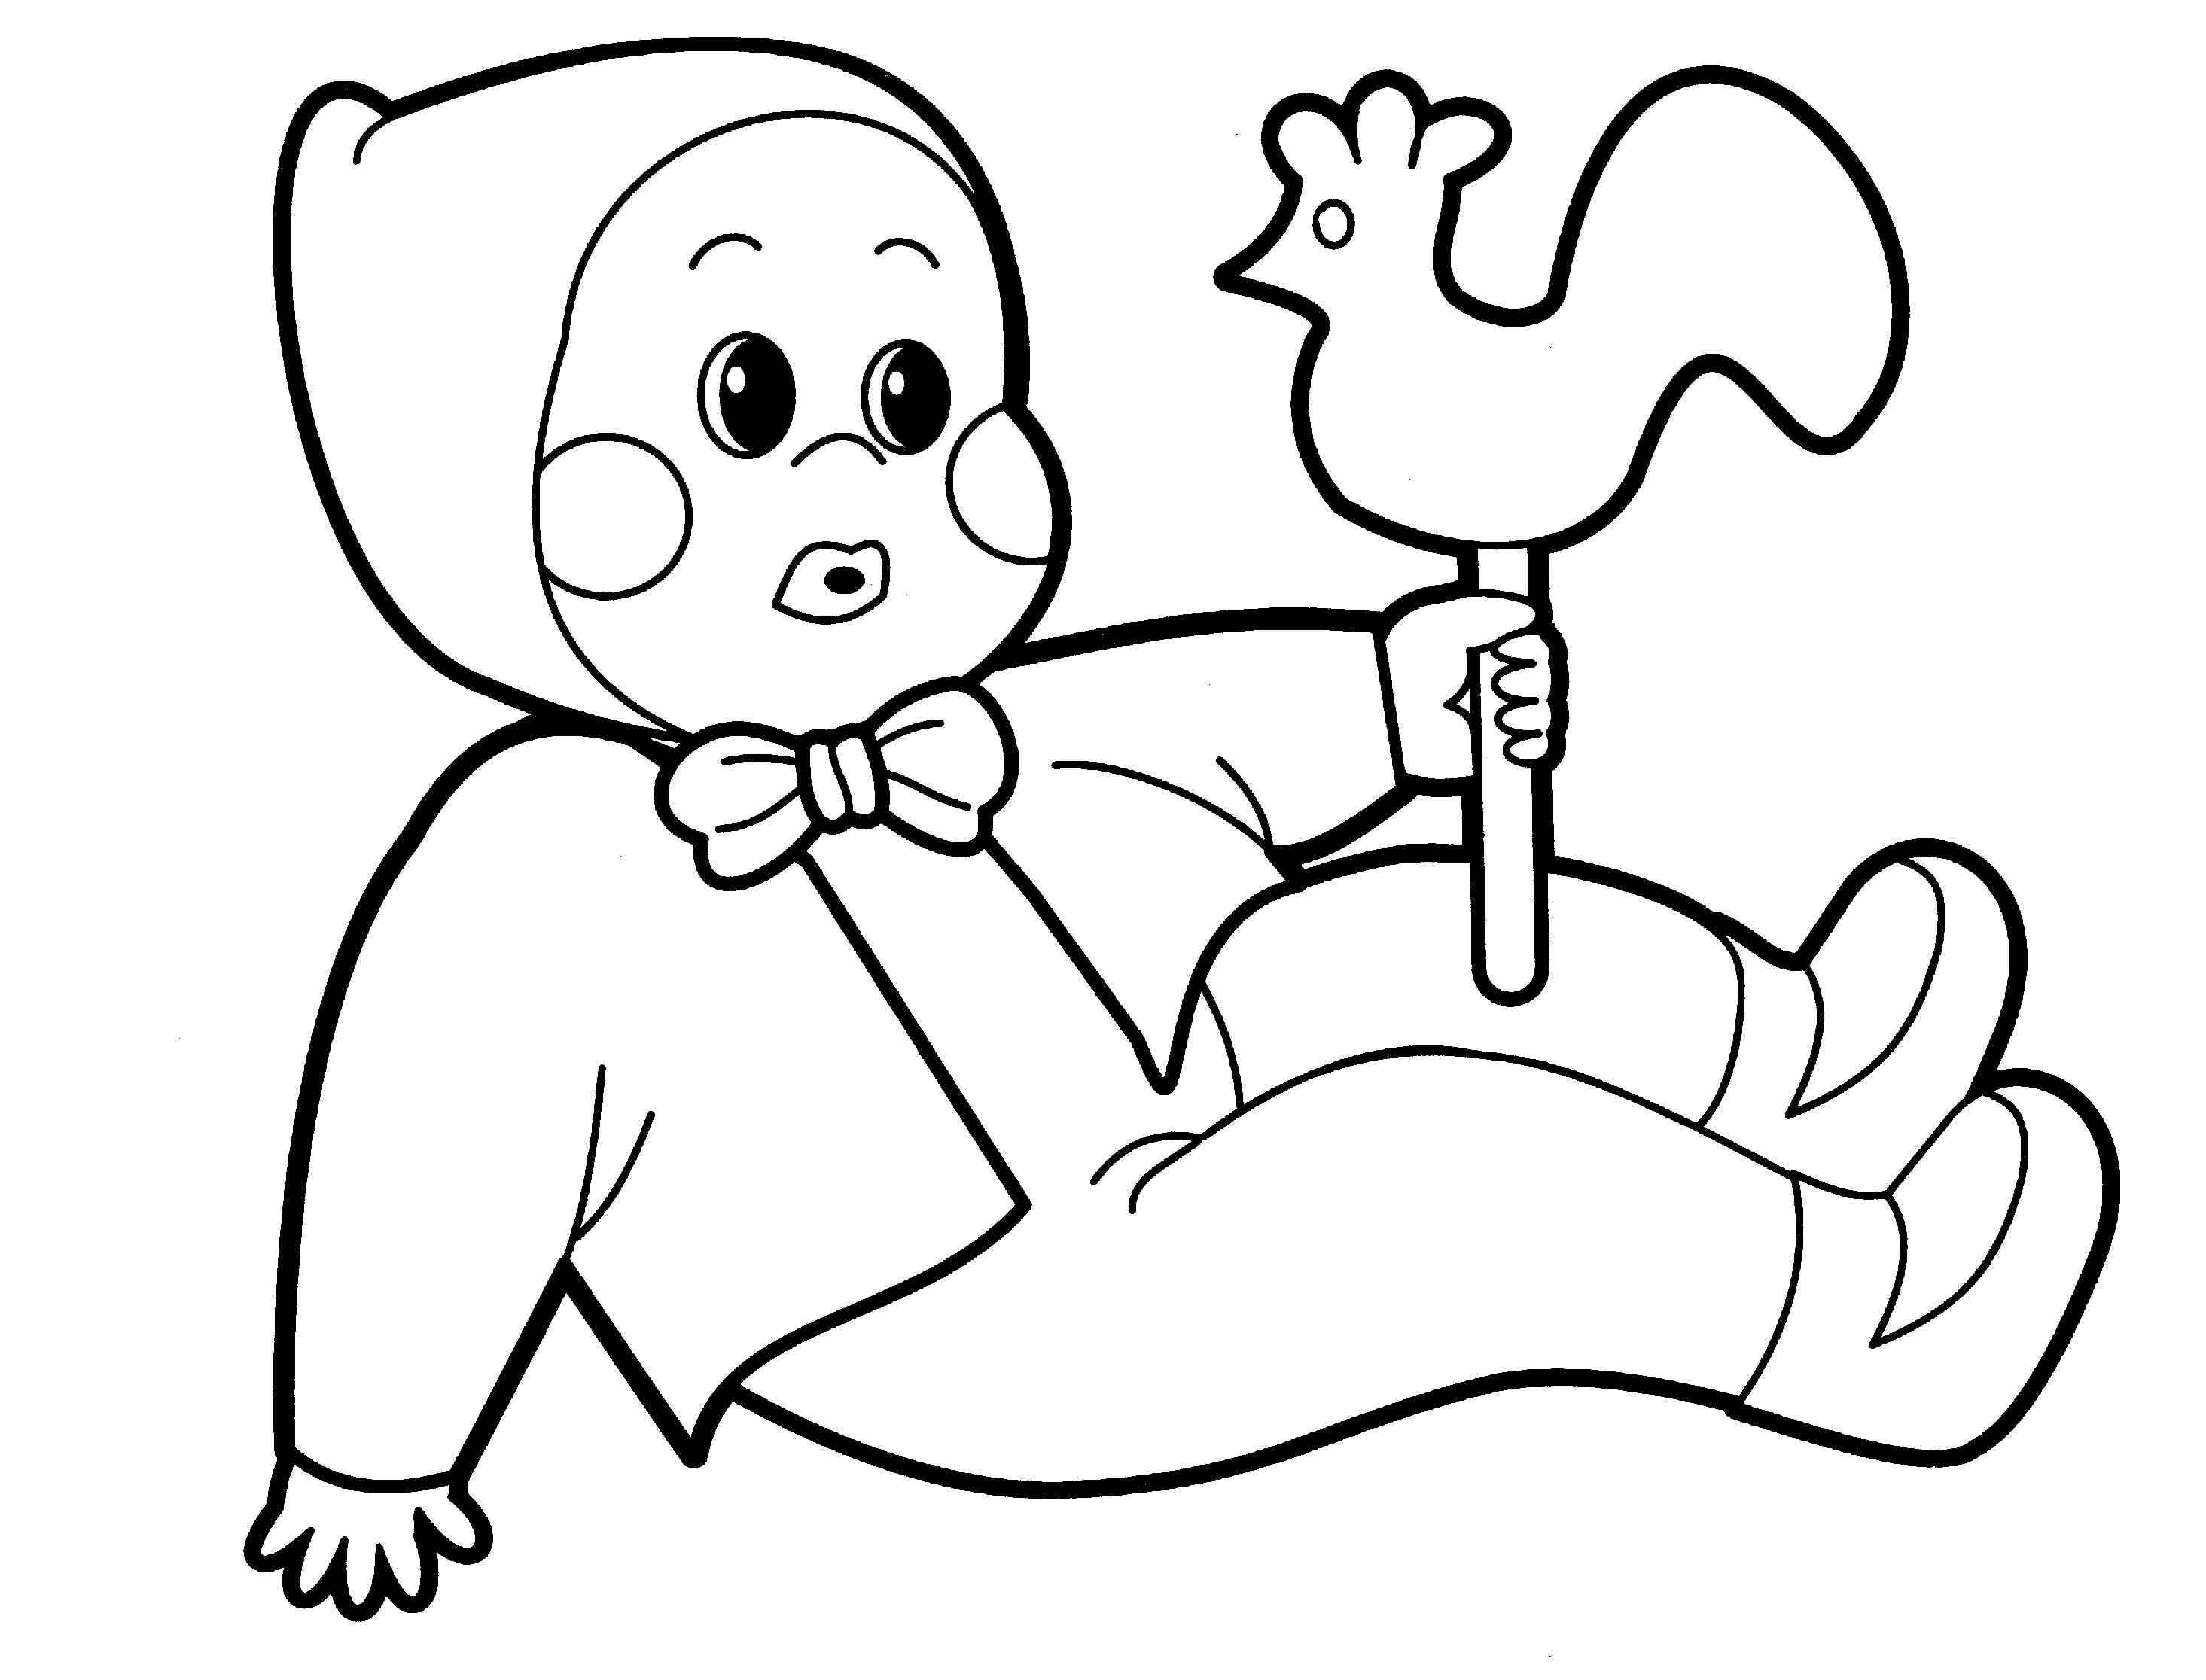 Nature and plants coloring pages for babies 8 / Nature and plants ...